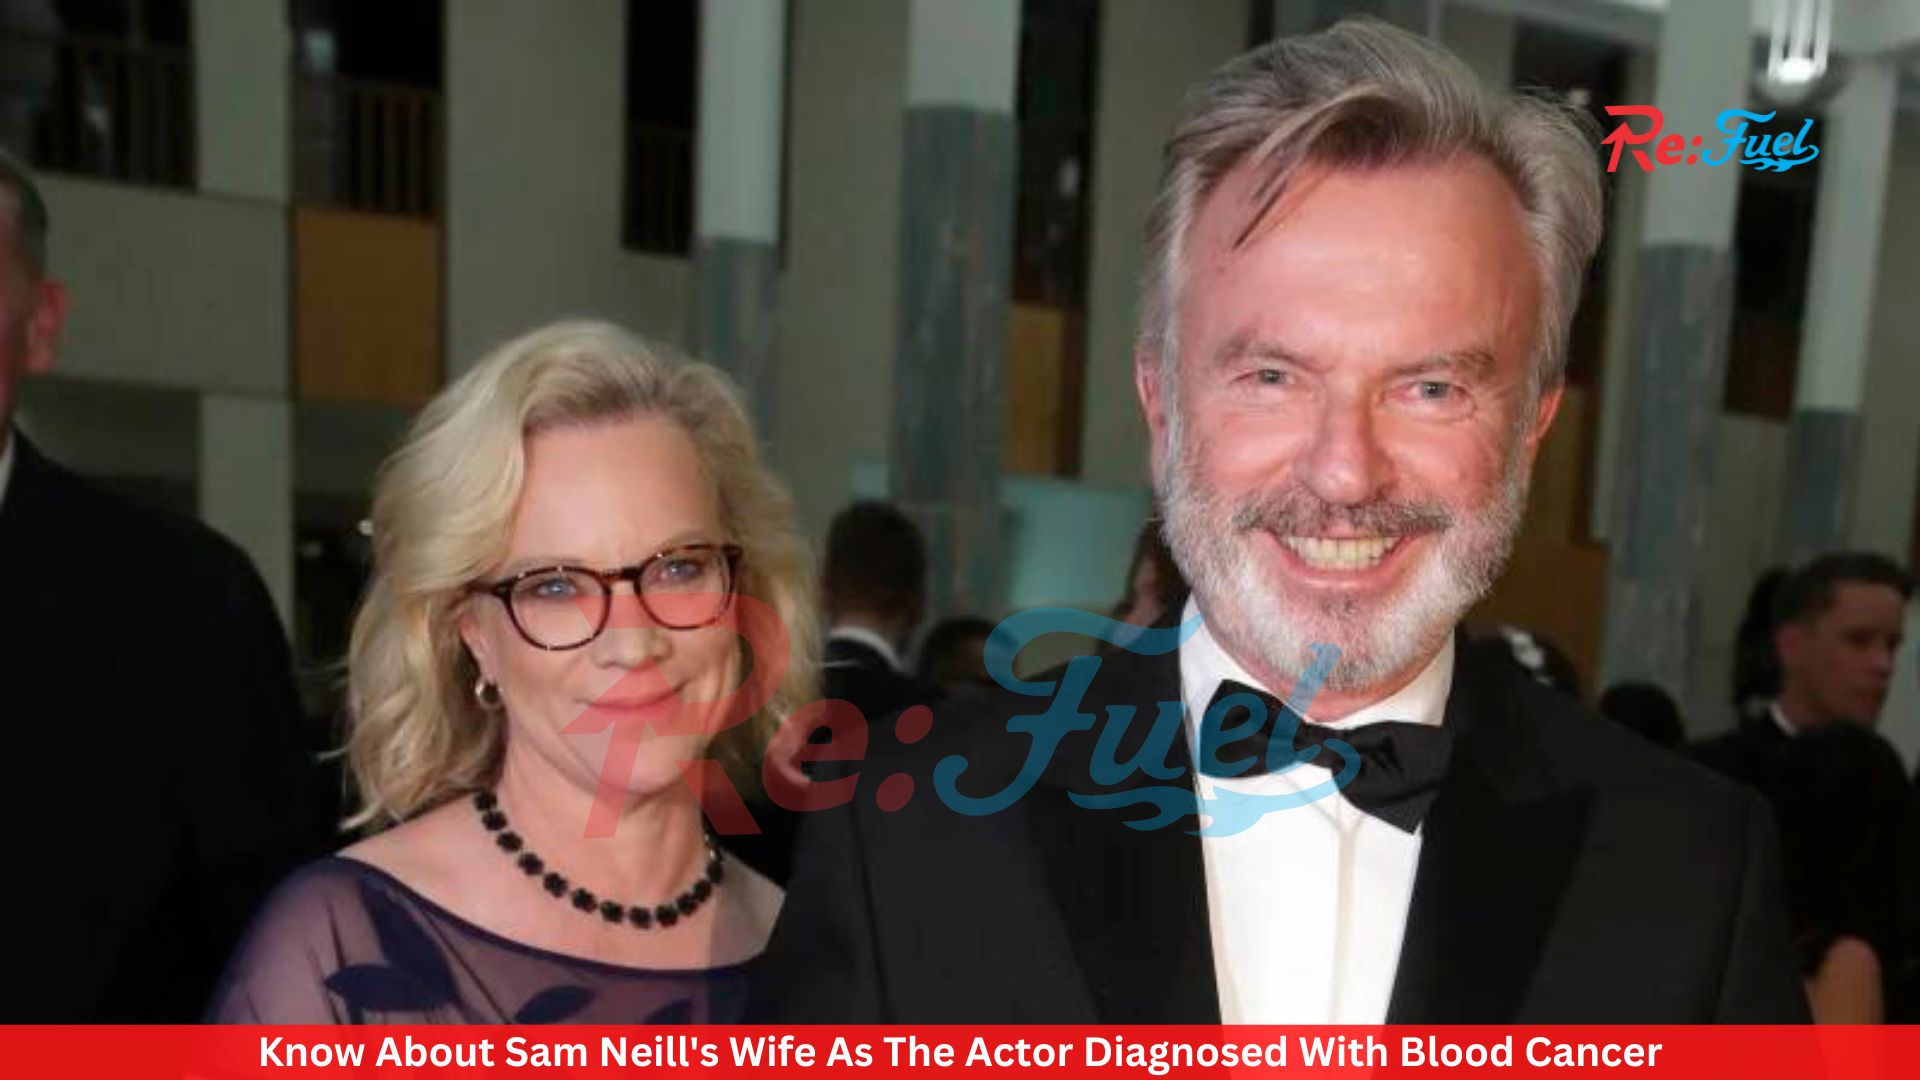 Know About Sam Neill's Wife As The Actor Diagnosed With Blood Cancer